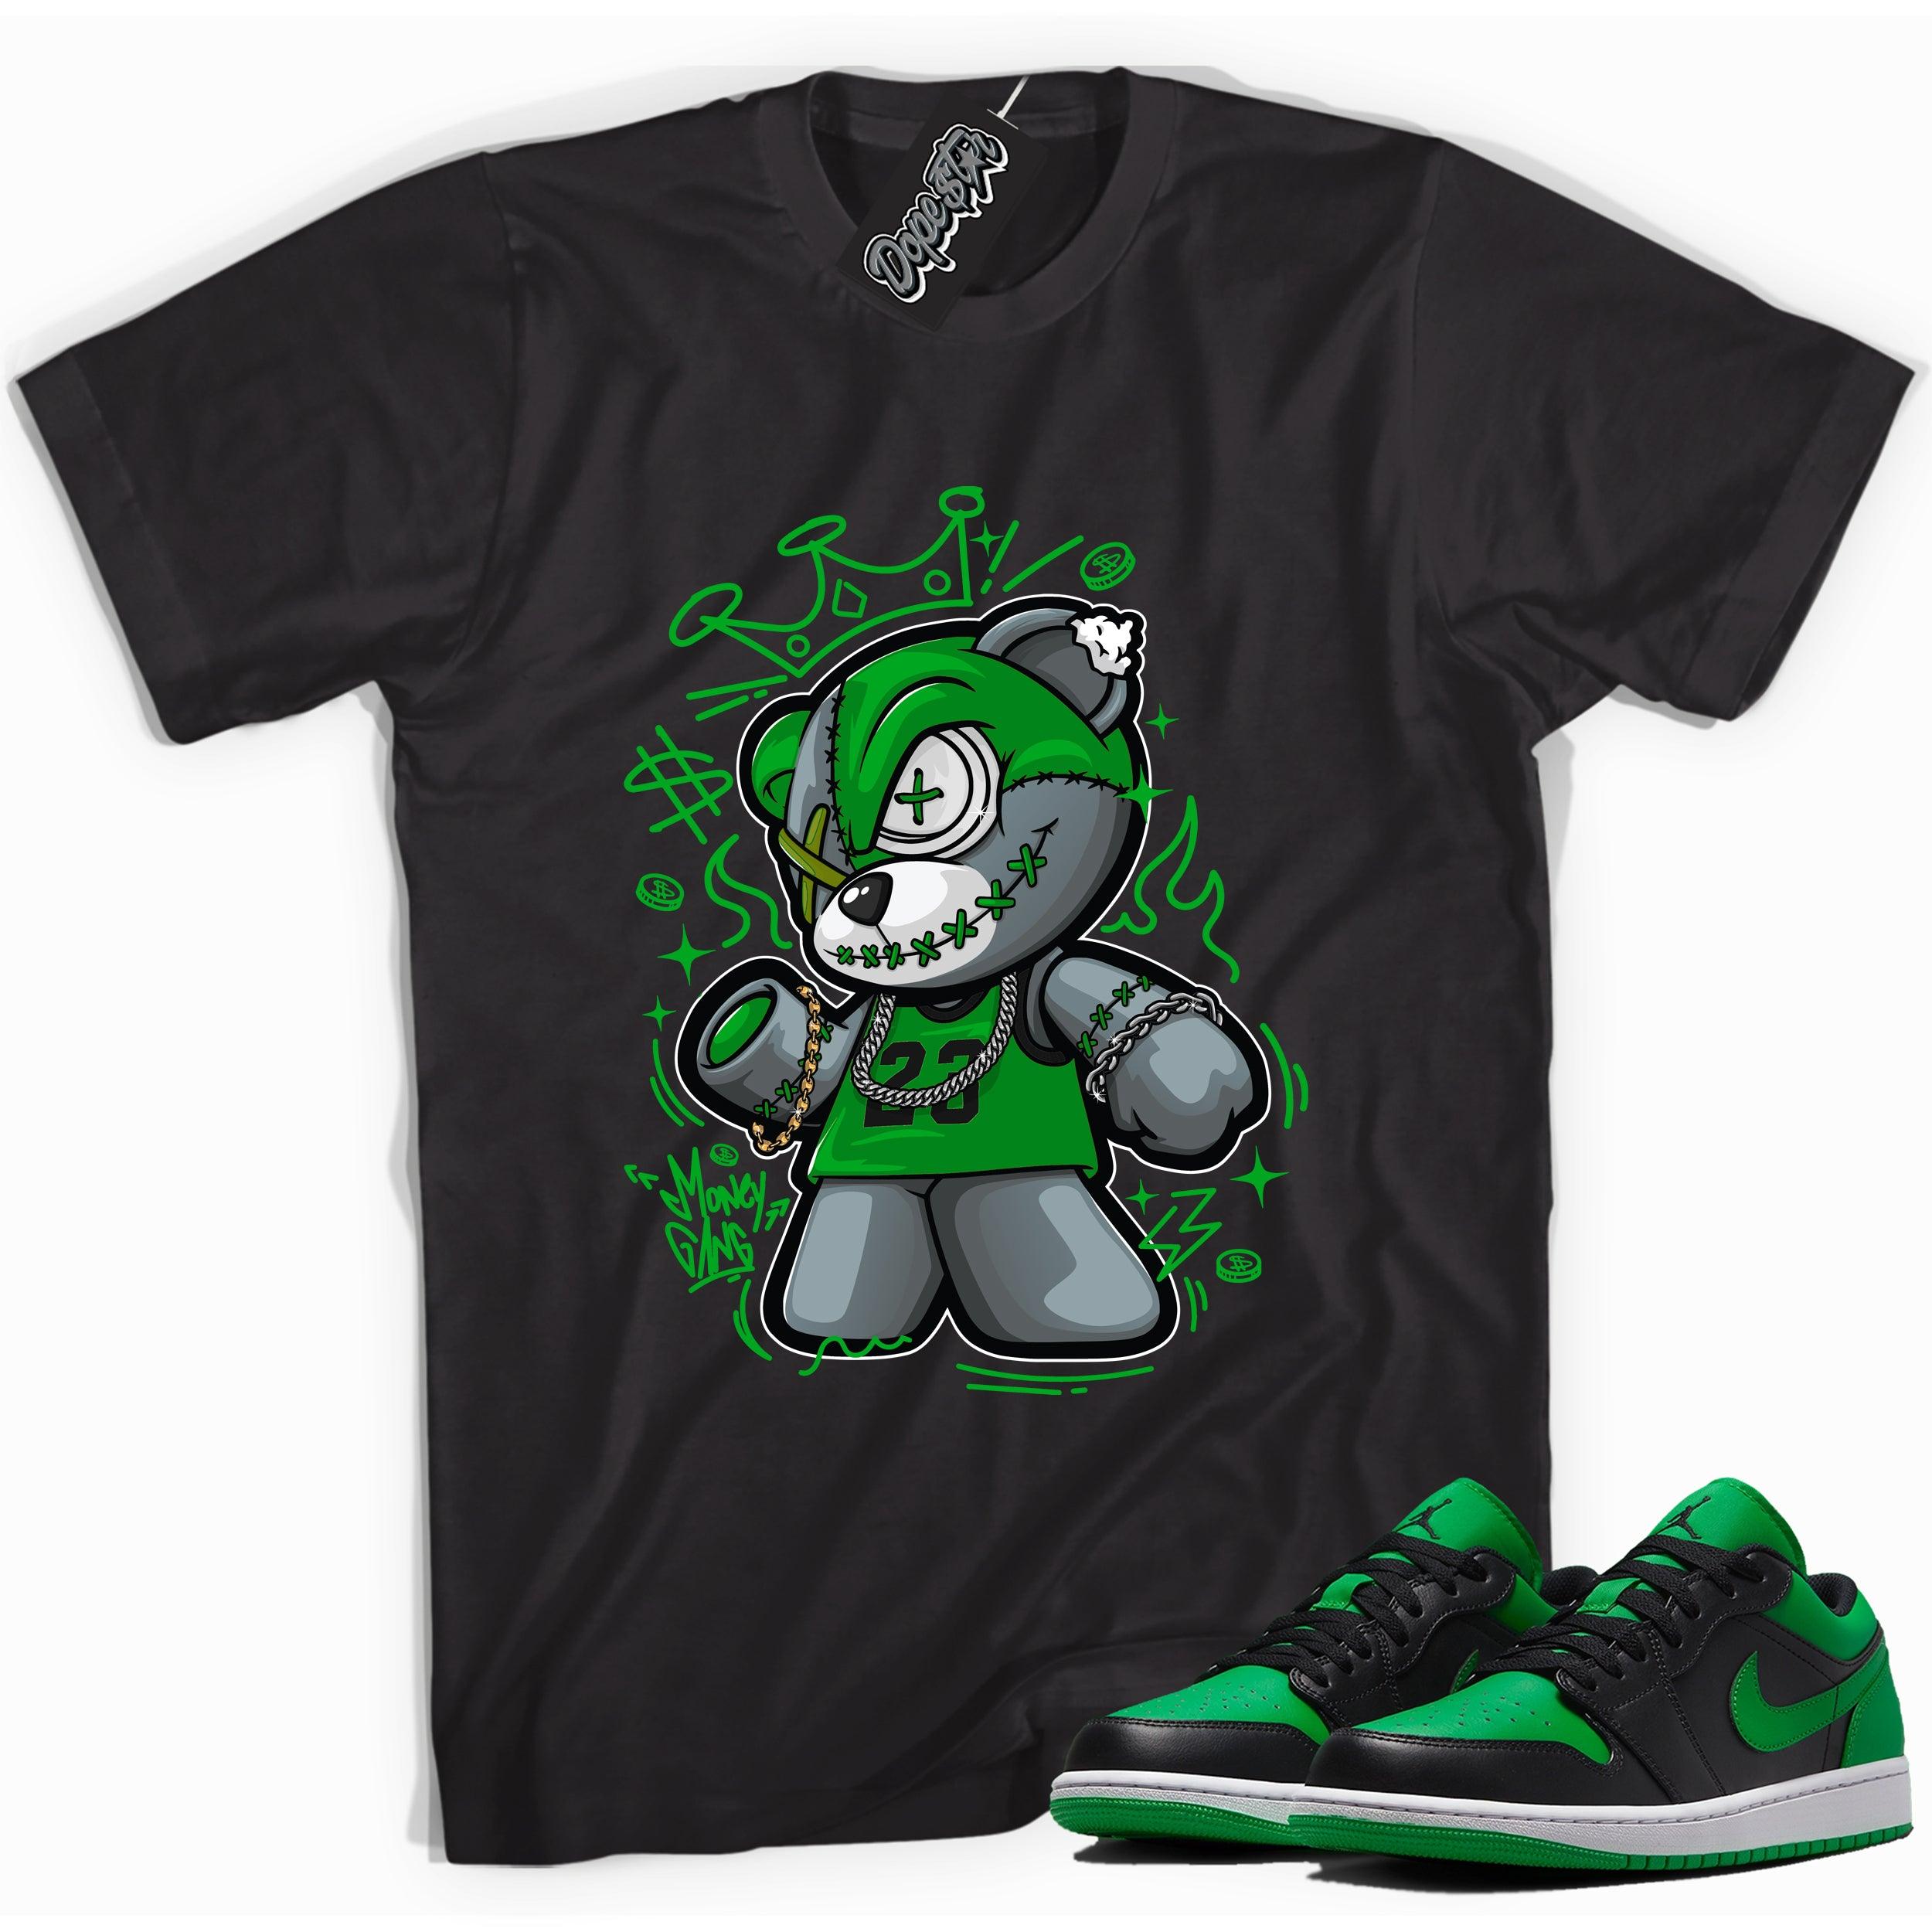 Cool black graphic tee with 'money gang bear' print, that perfectly matches Air Jordan 1 Low Lucky Green sneakers